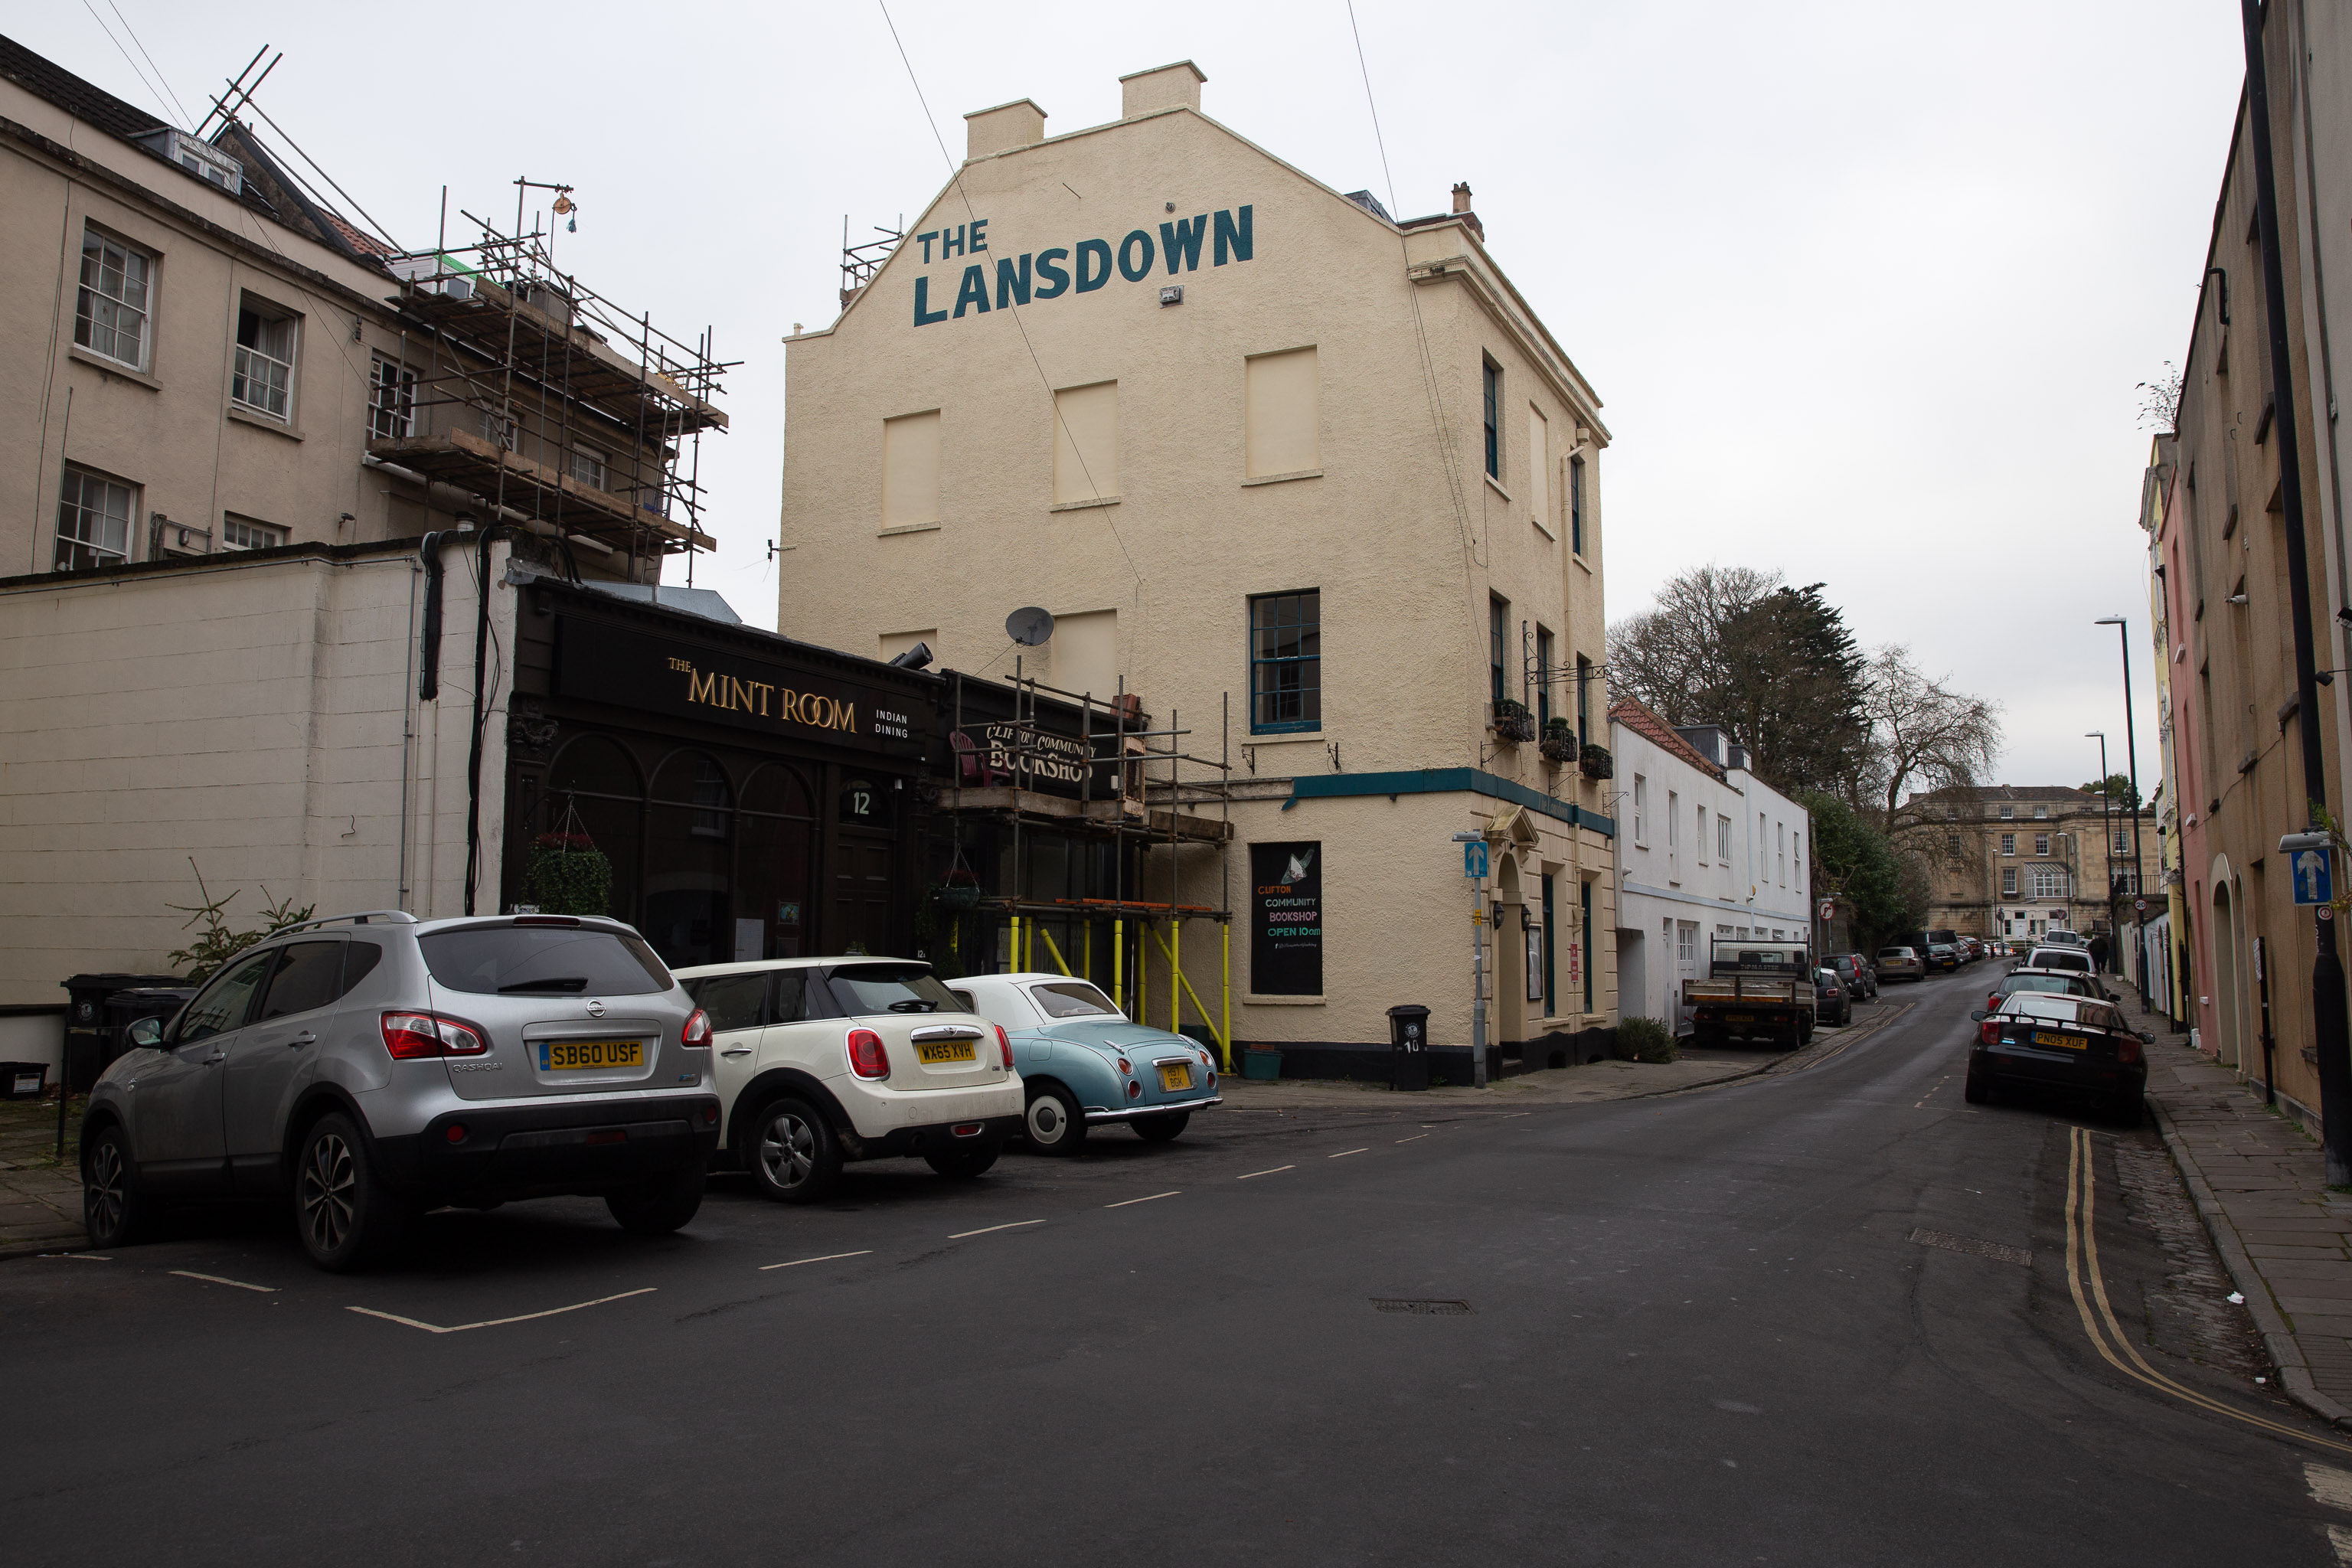 THE LANSDOWN
I don't think I've ever been in the Lansdown, but I may be wrong.
